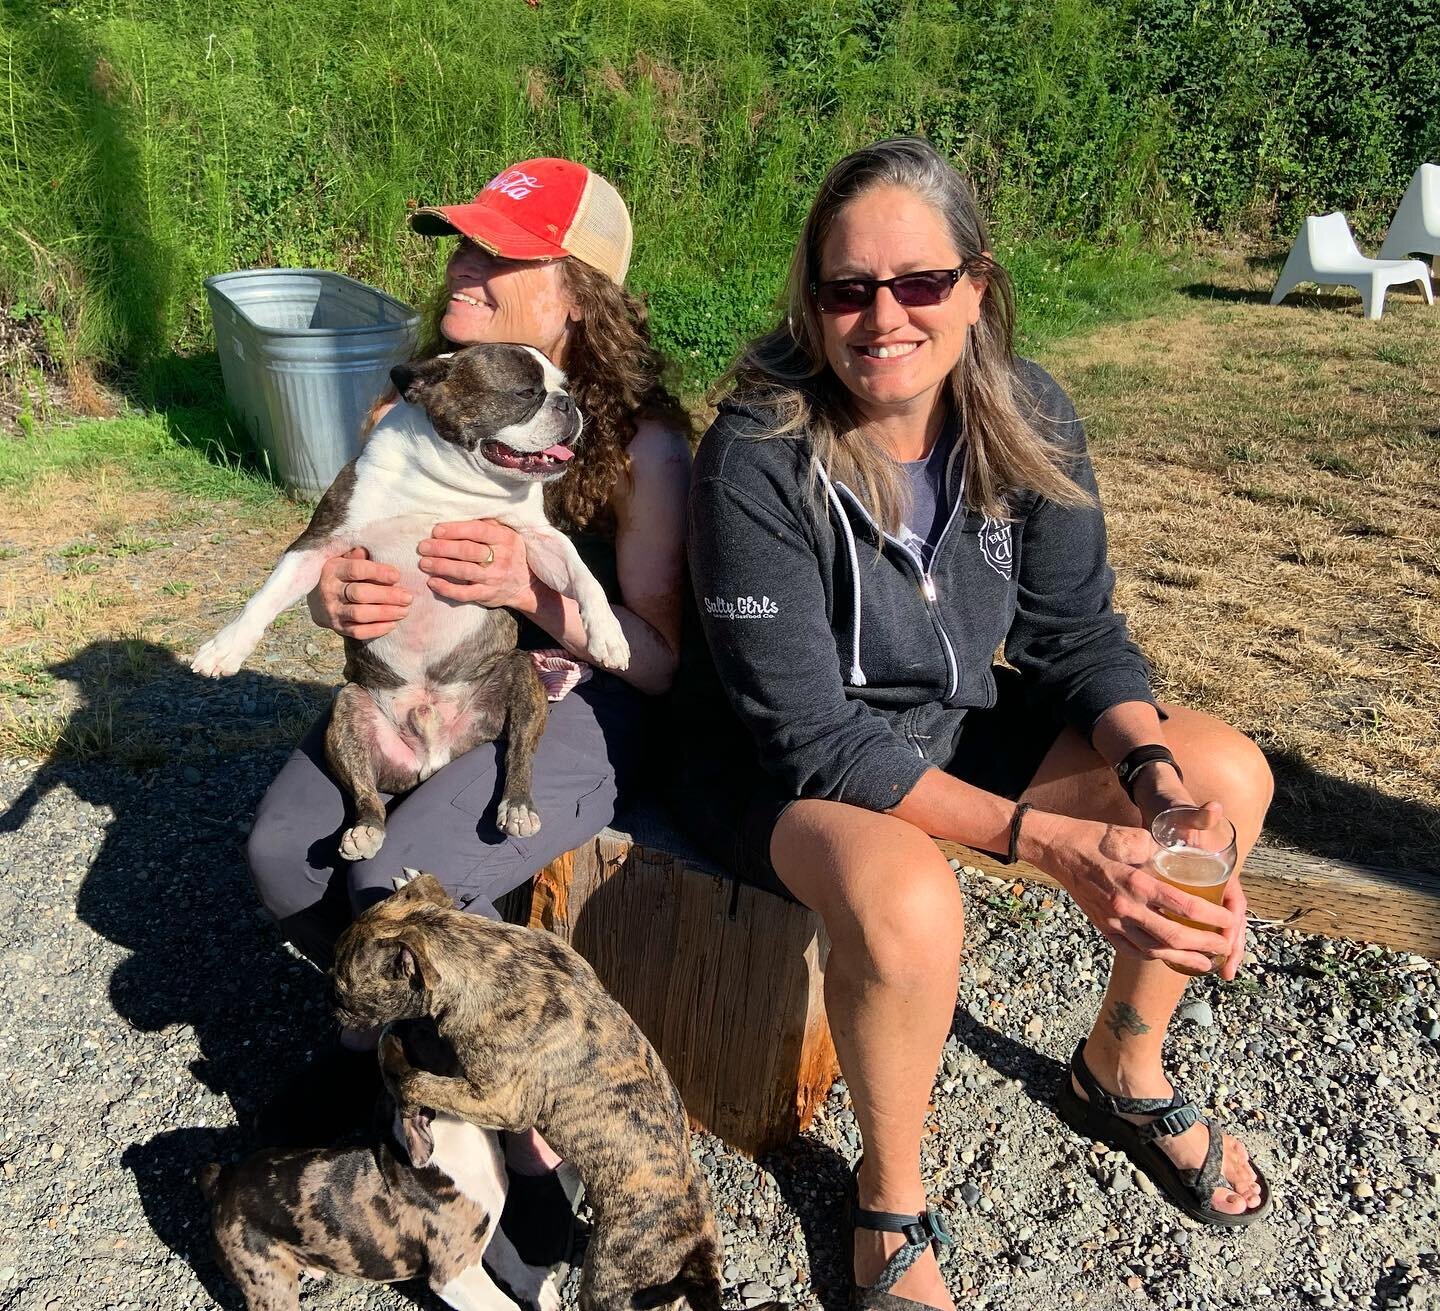 Owners Tracy and Lavon relaxing with all the dogs &hellip; I think this is their happy place 😍🐶 All our cabins here are dog friendly, book now at Sunsetmarineresort.com 🙌
.
.
.

#sequimwa
#sequim  #sequimwashington #sequimbay #sequimairbnb #bestai